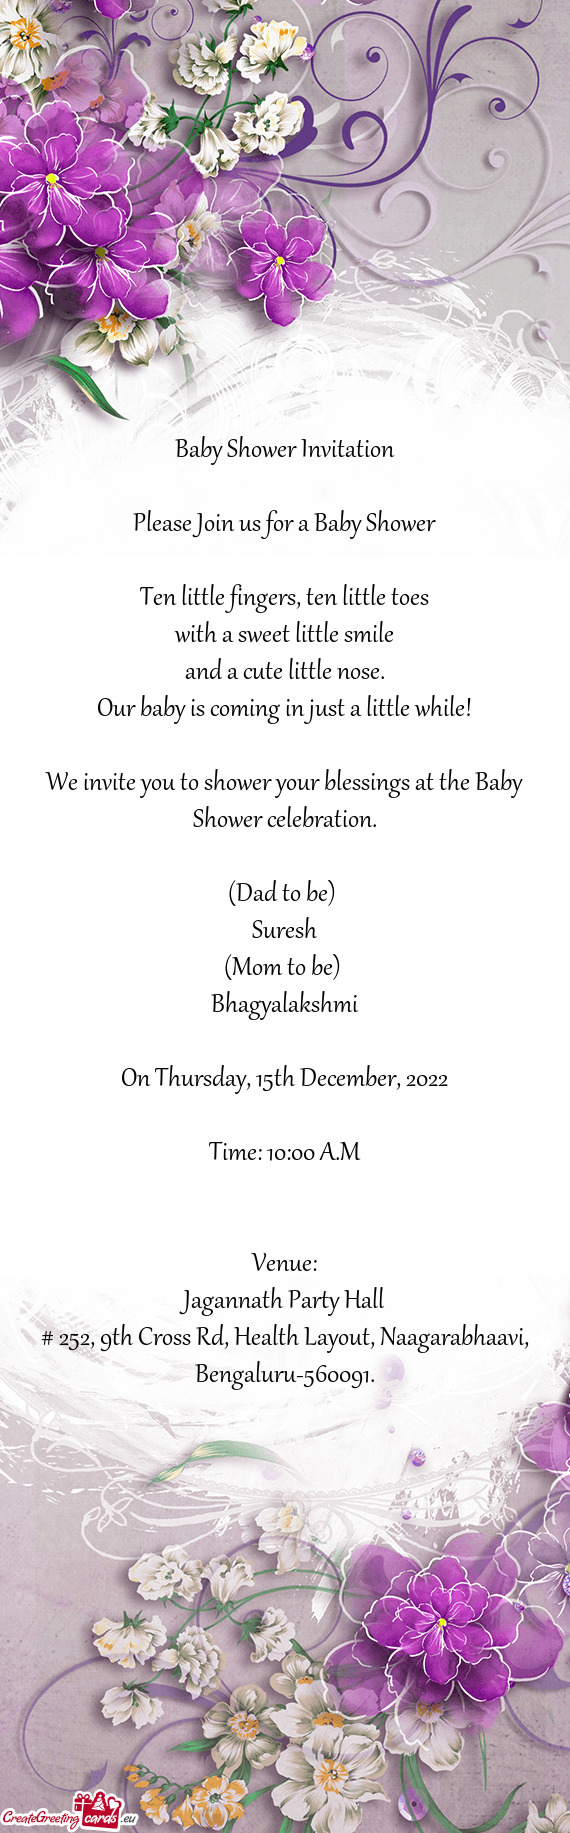 We invite you to shower your blessings at the Baby Shower celebration